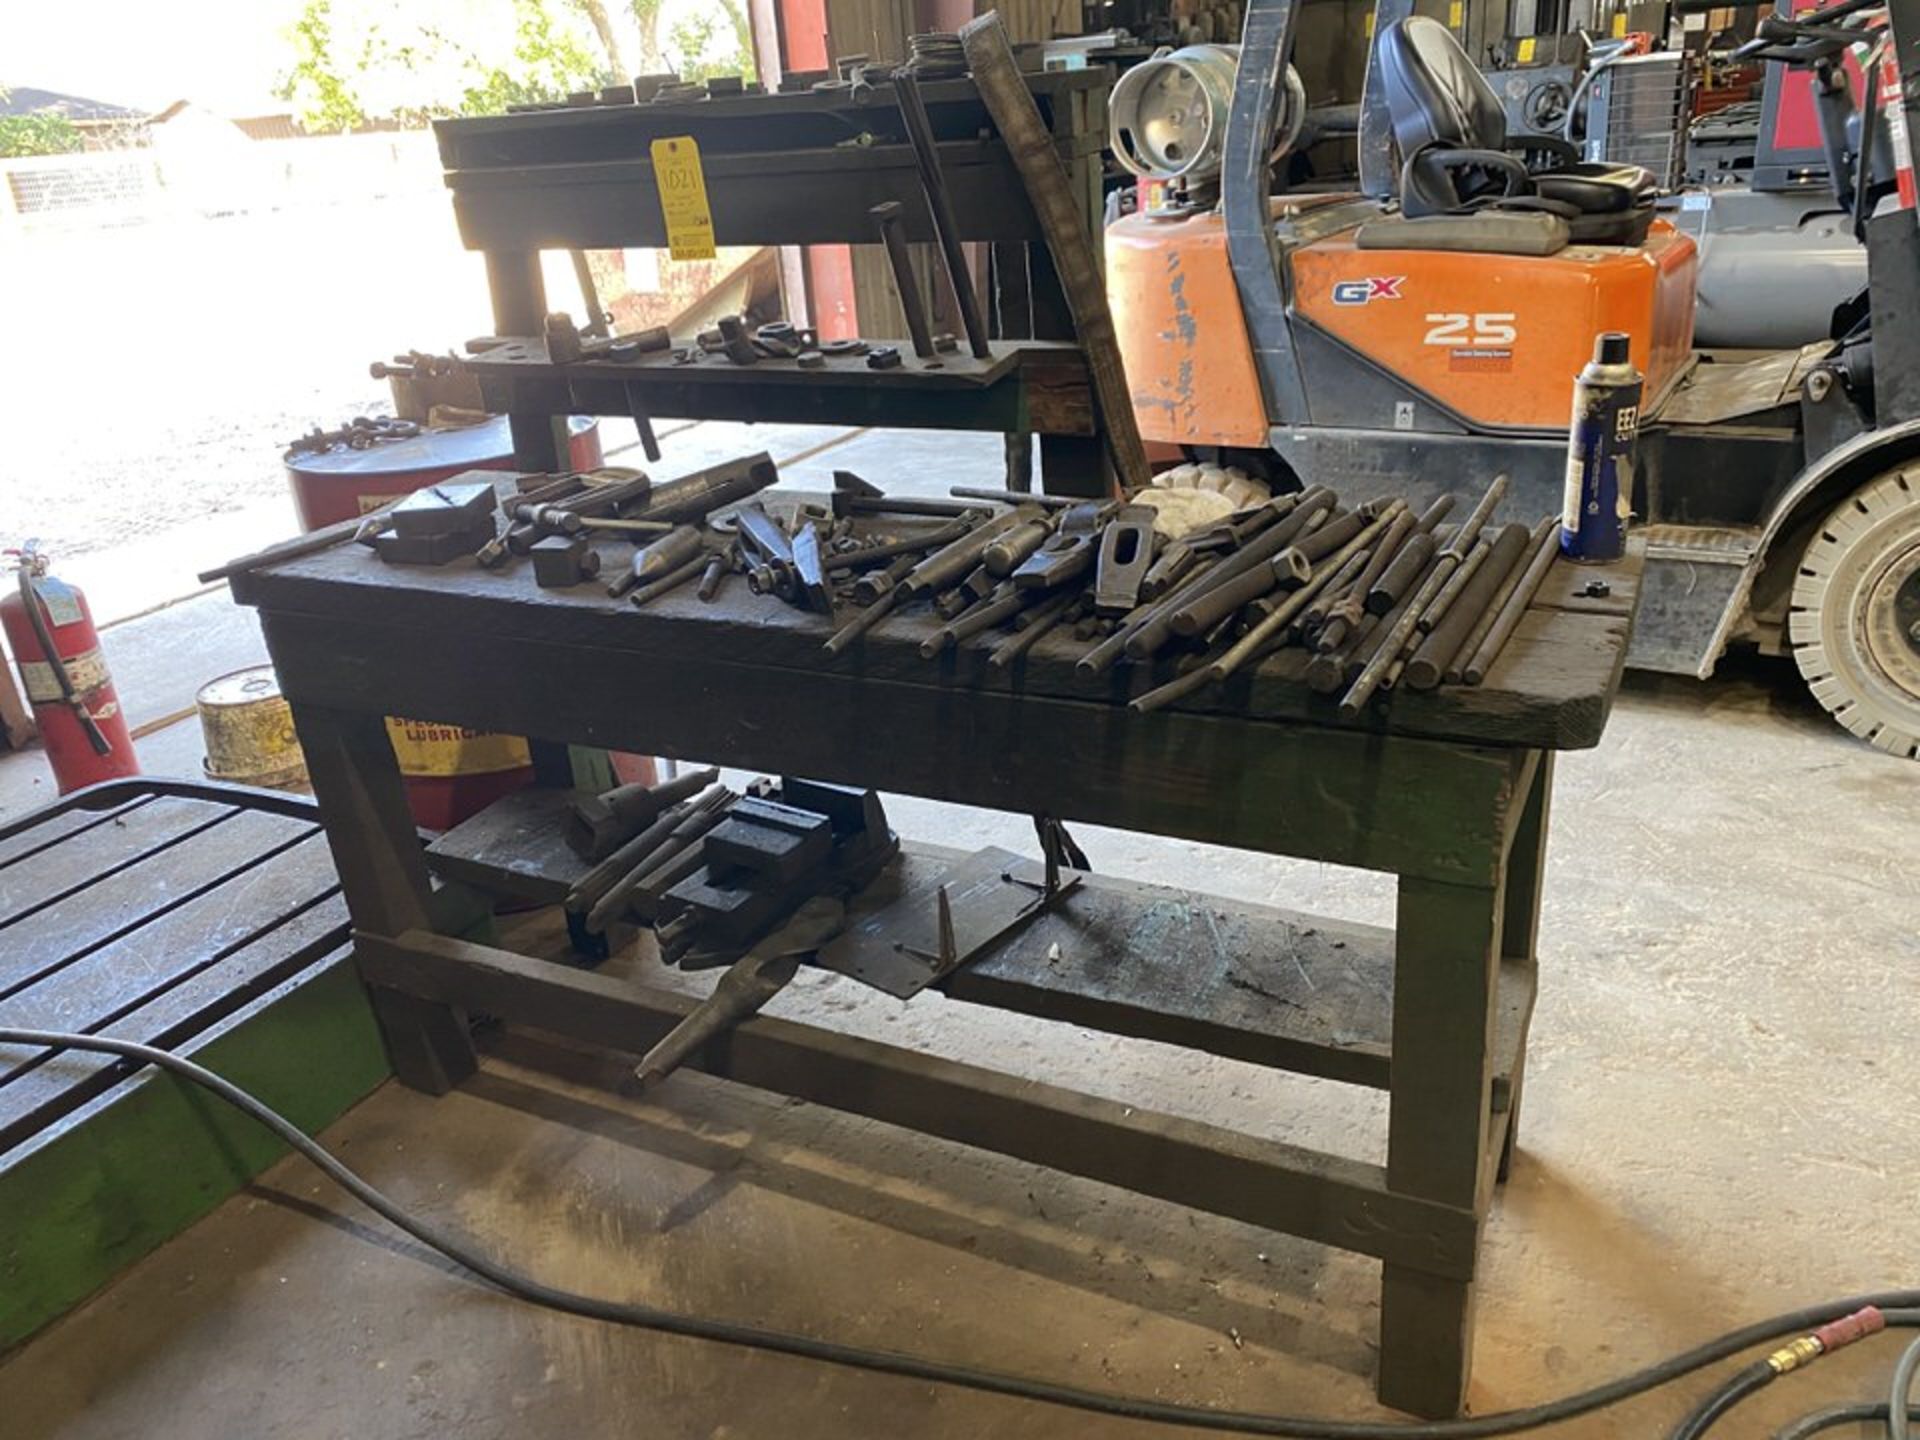 Wooden Work Table with Contents (tooling)